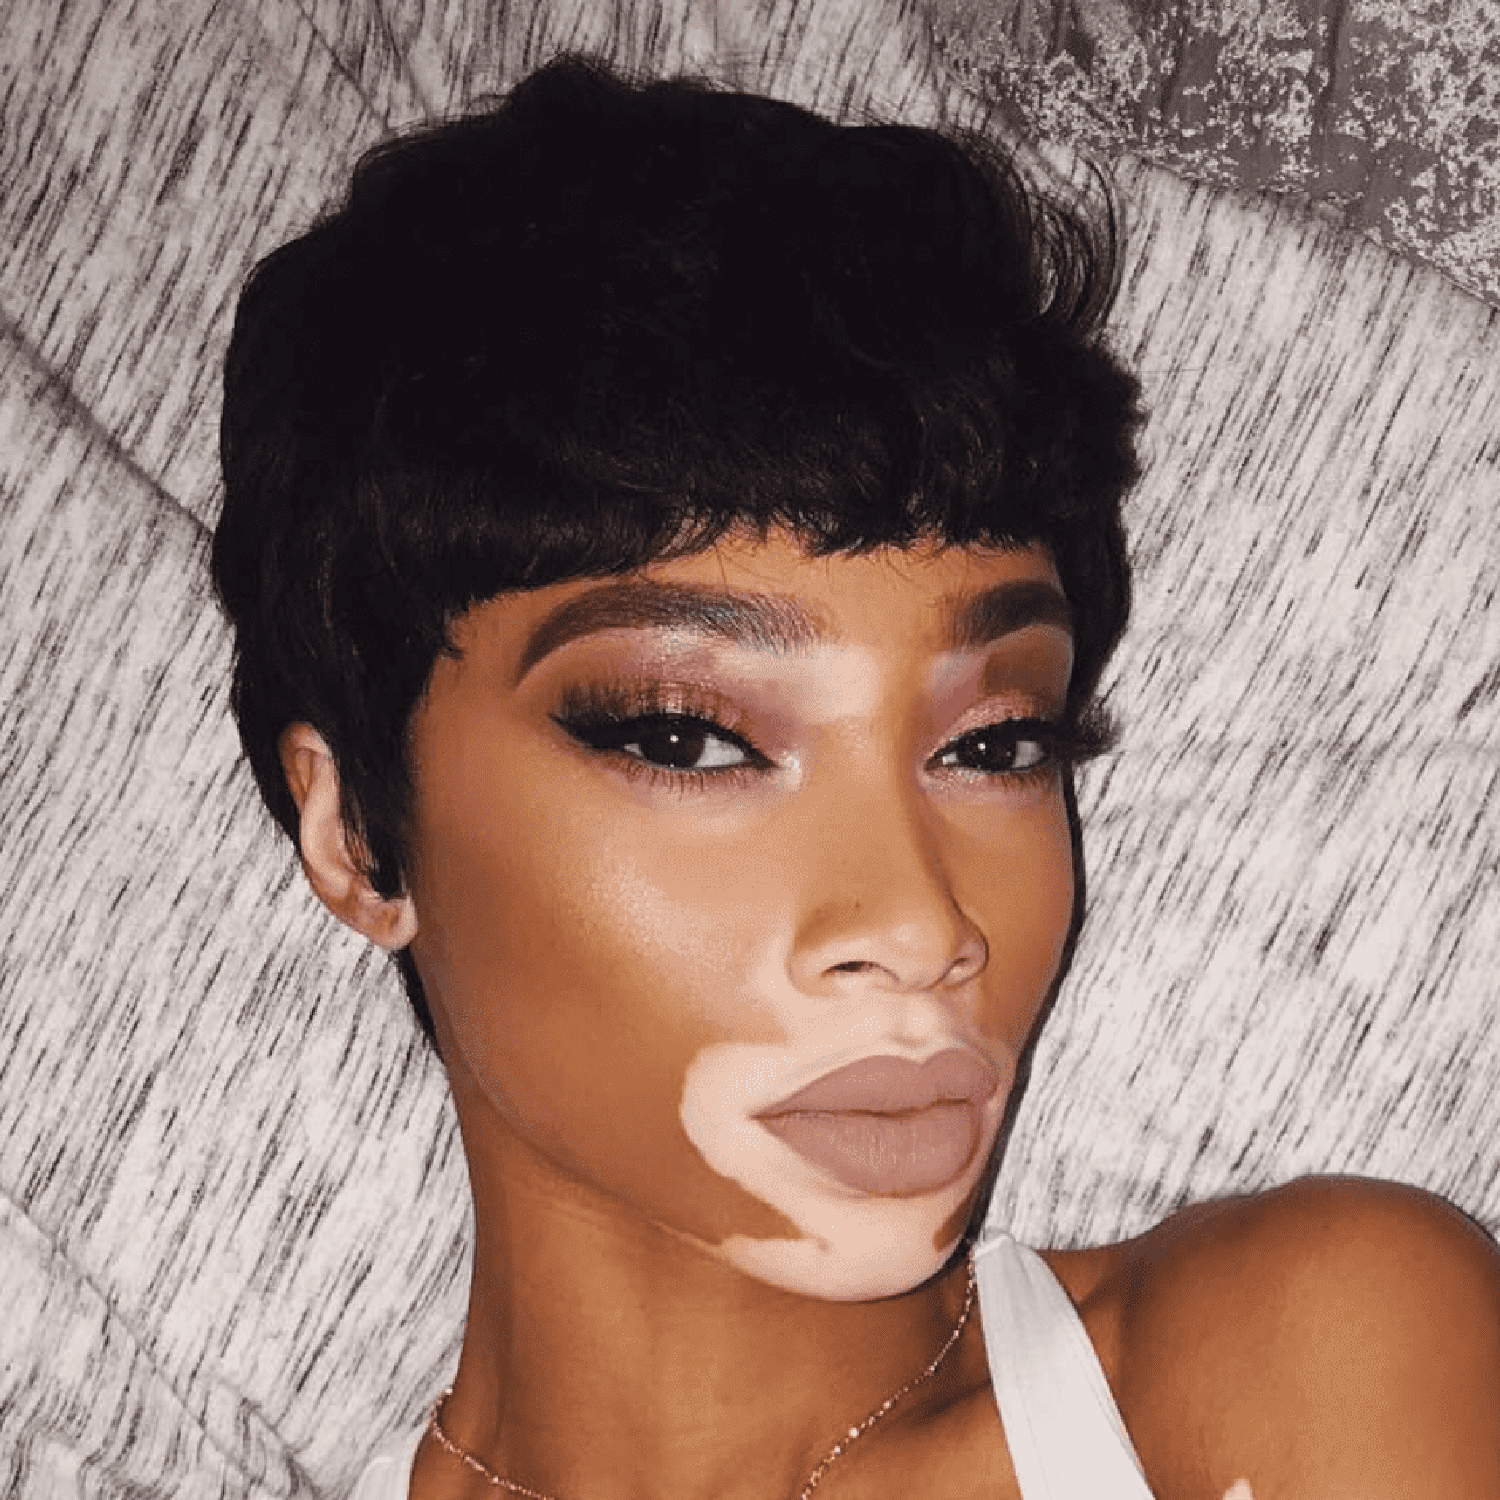 Winnie Harlow with a pixie haircut and baby bangs